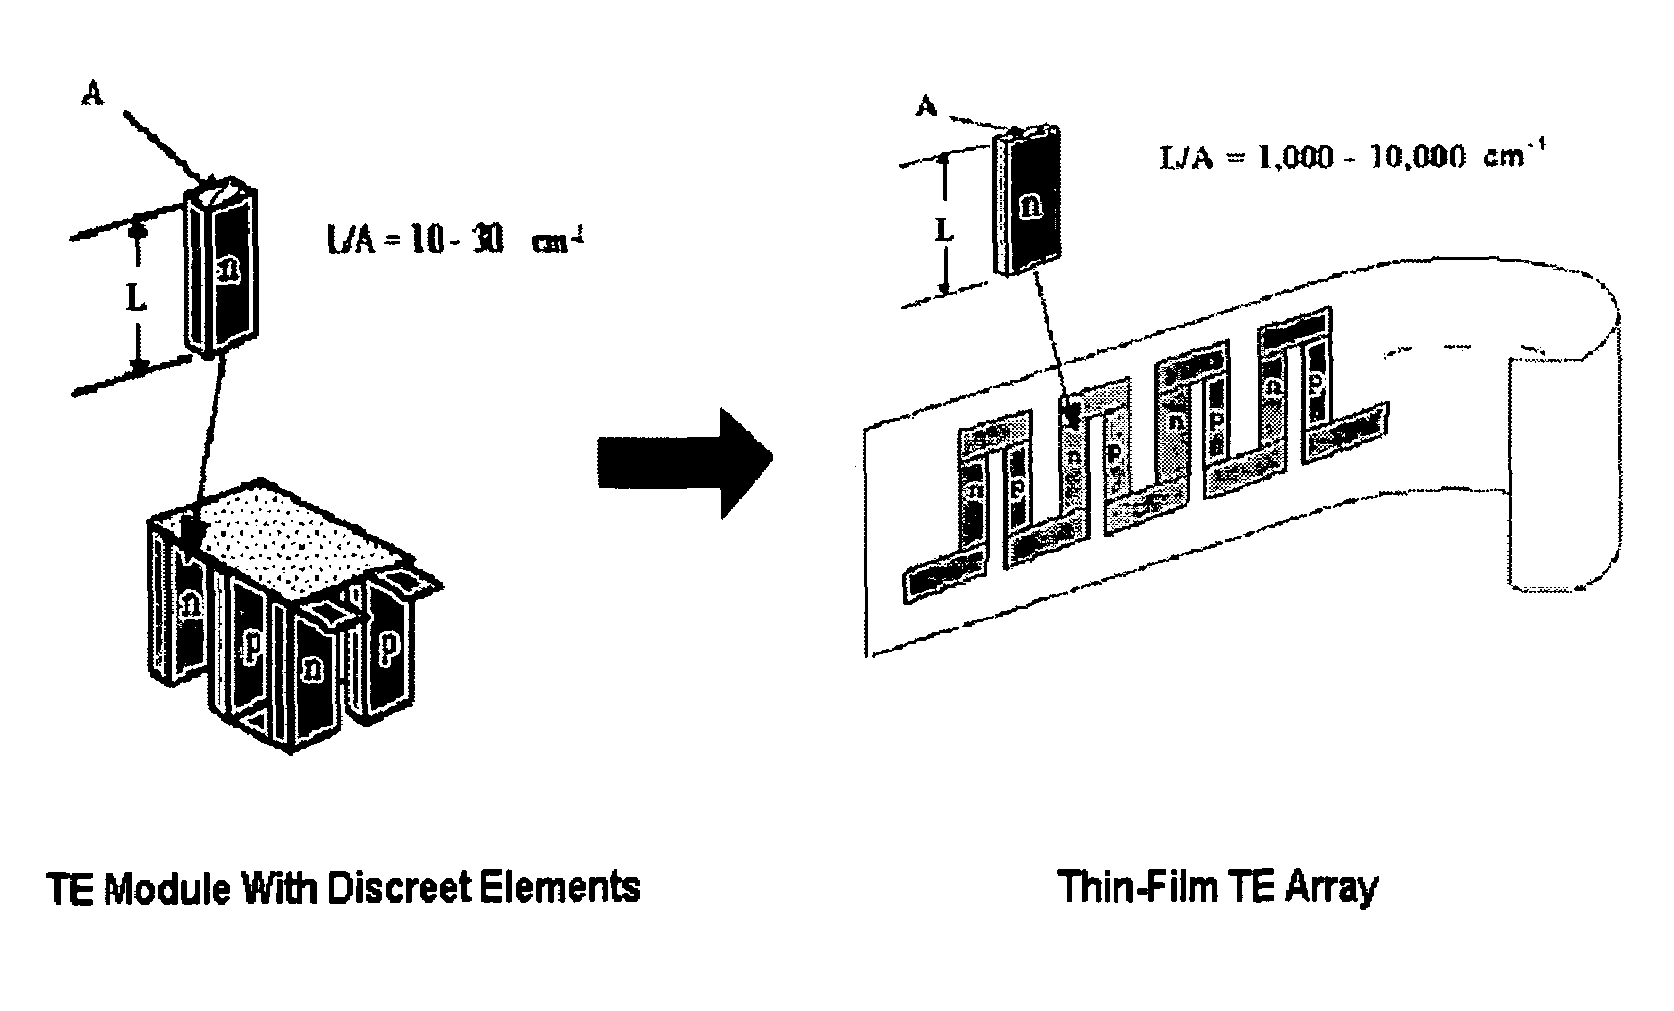 Thermoelectric power source utilizing ambient energy harvesting for remote sensing and transmitting